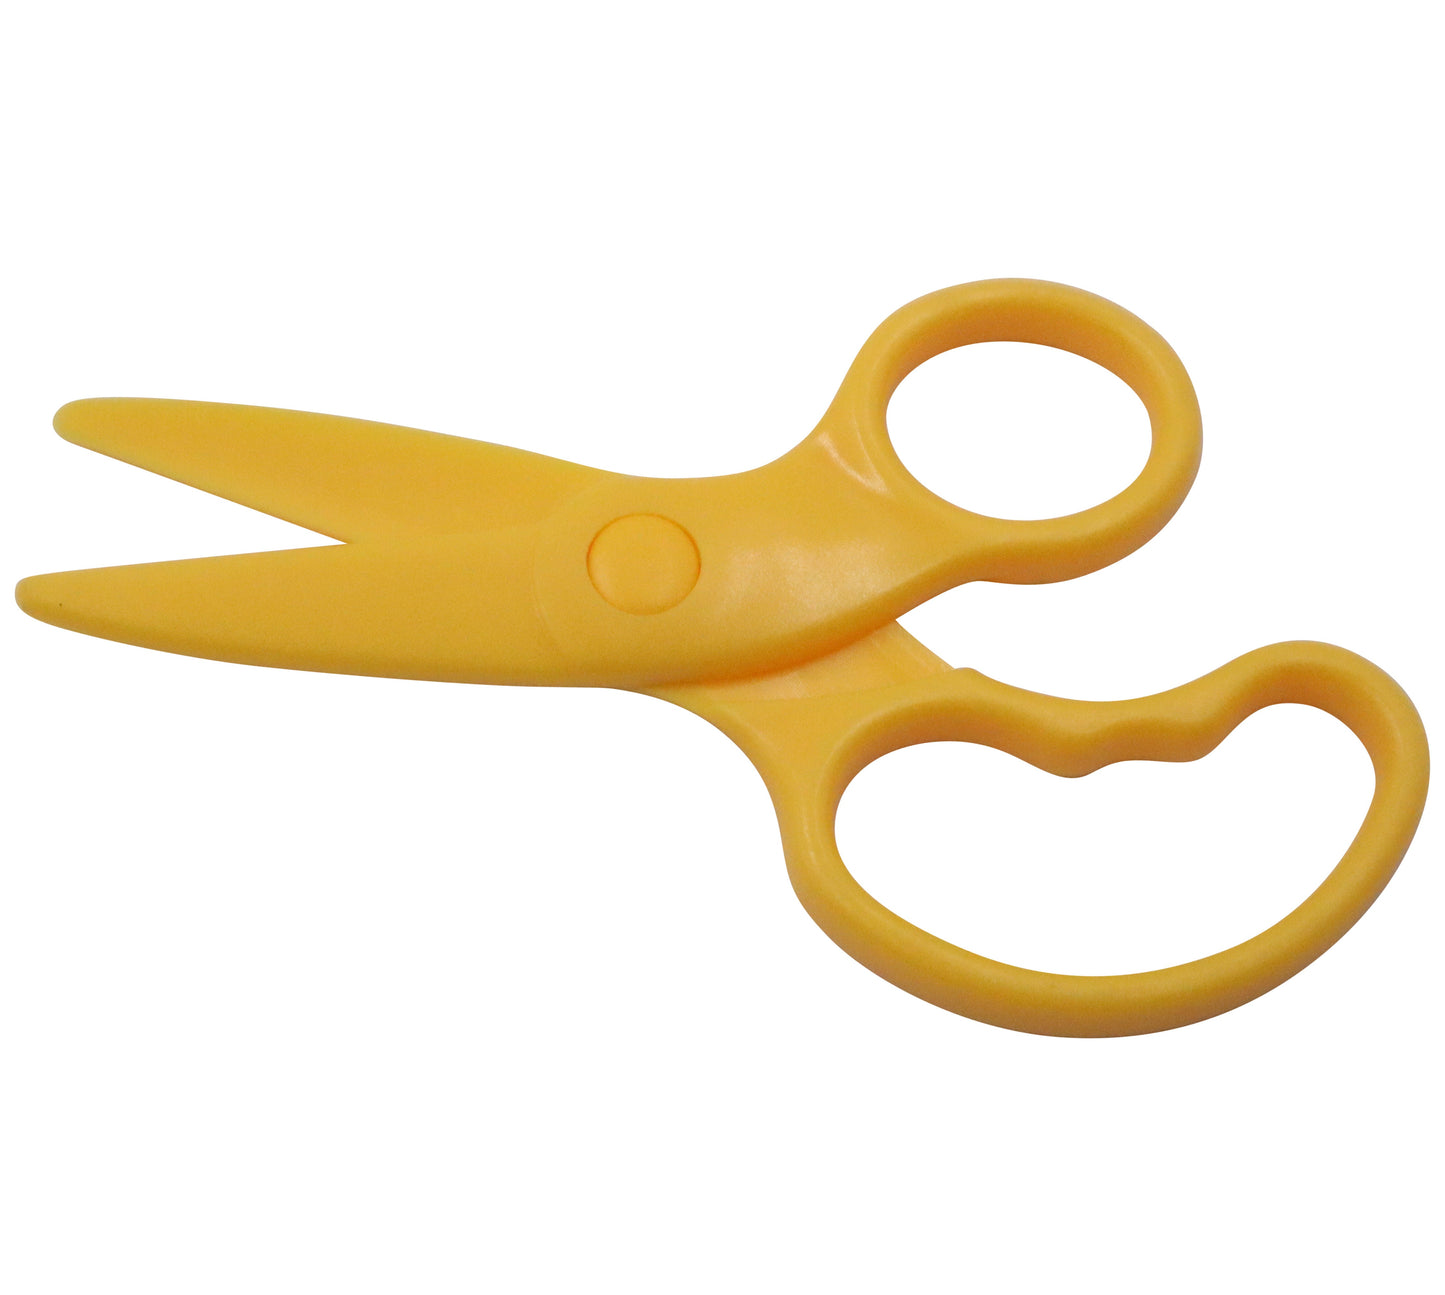 Dough Scissors | Learning and Exploring Through Play